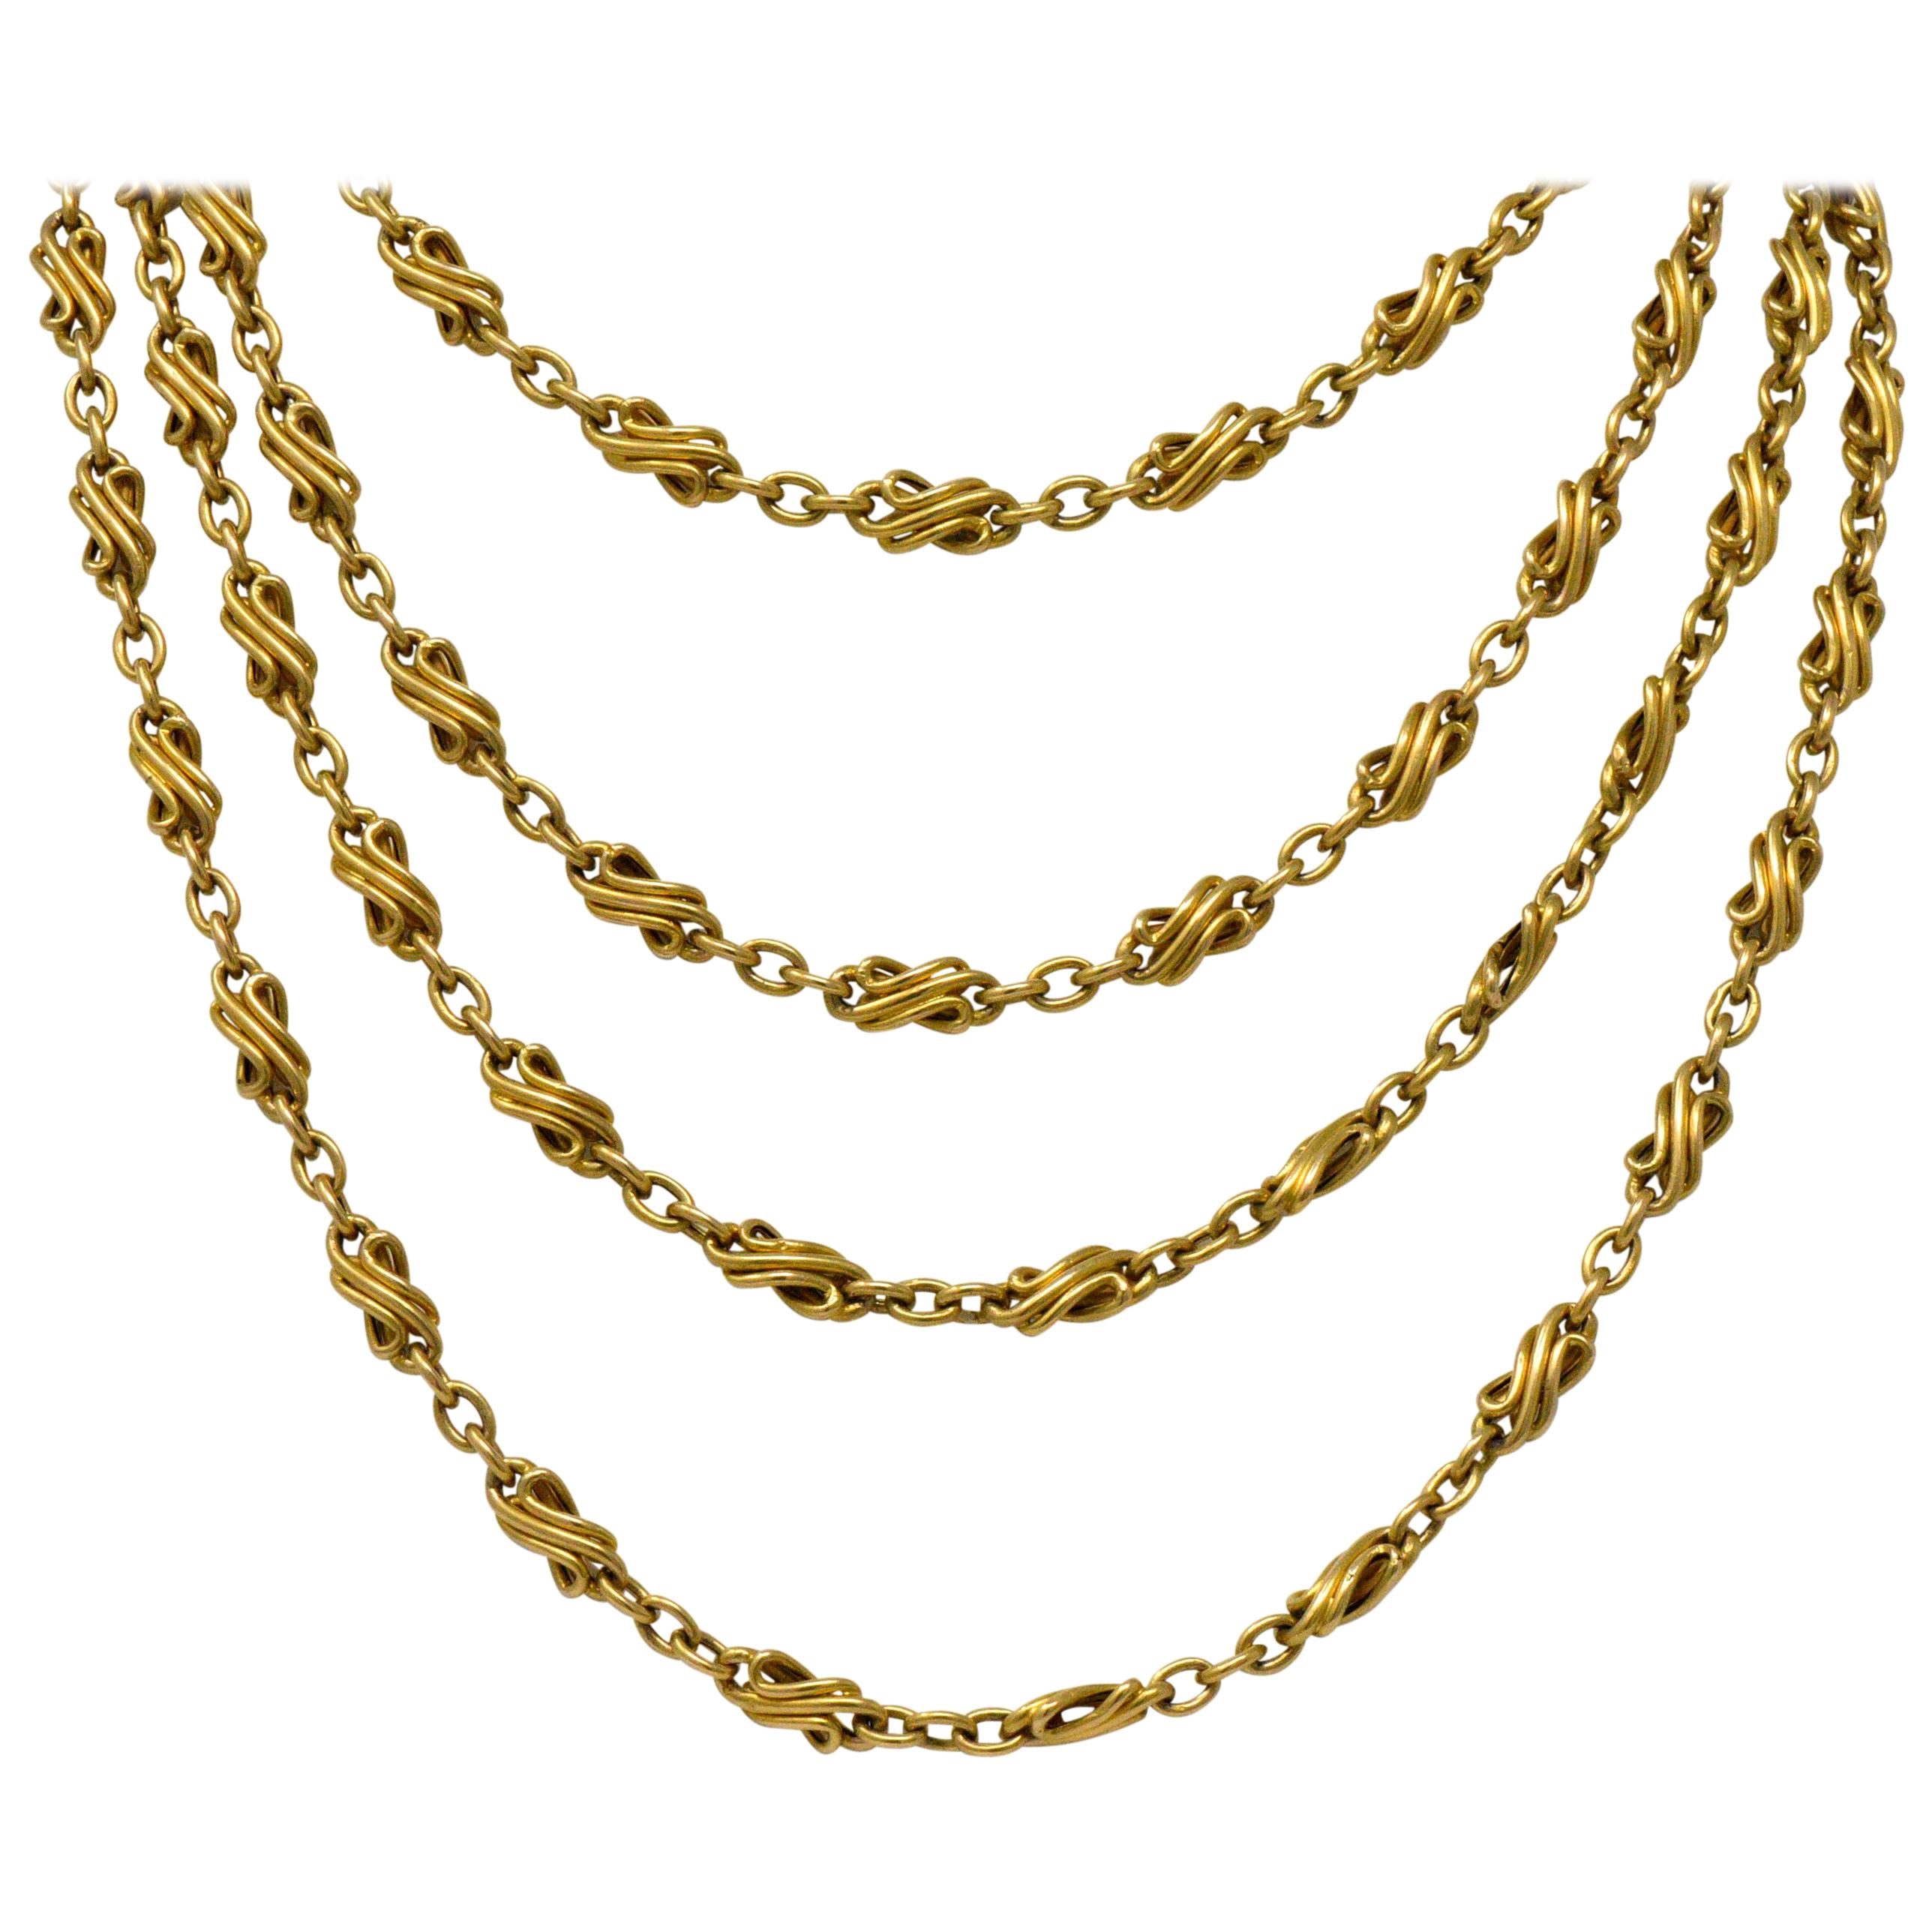 Victorian 18 Karat Gold 67 Inch Twisted Link Long Chain Necklace